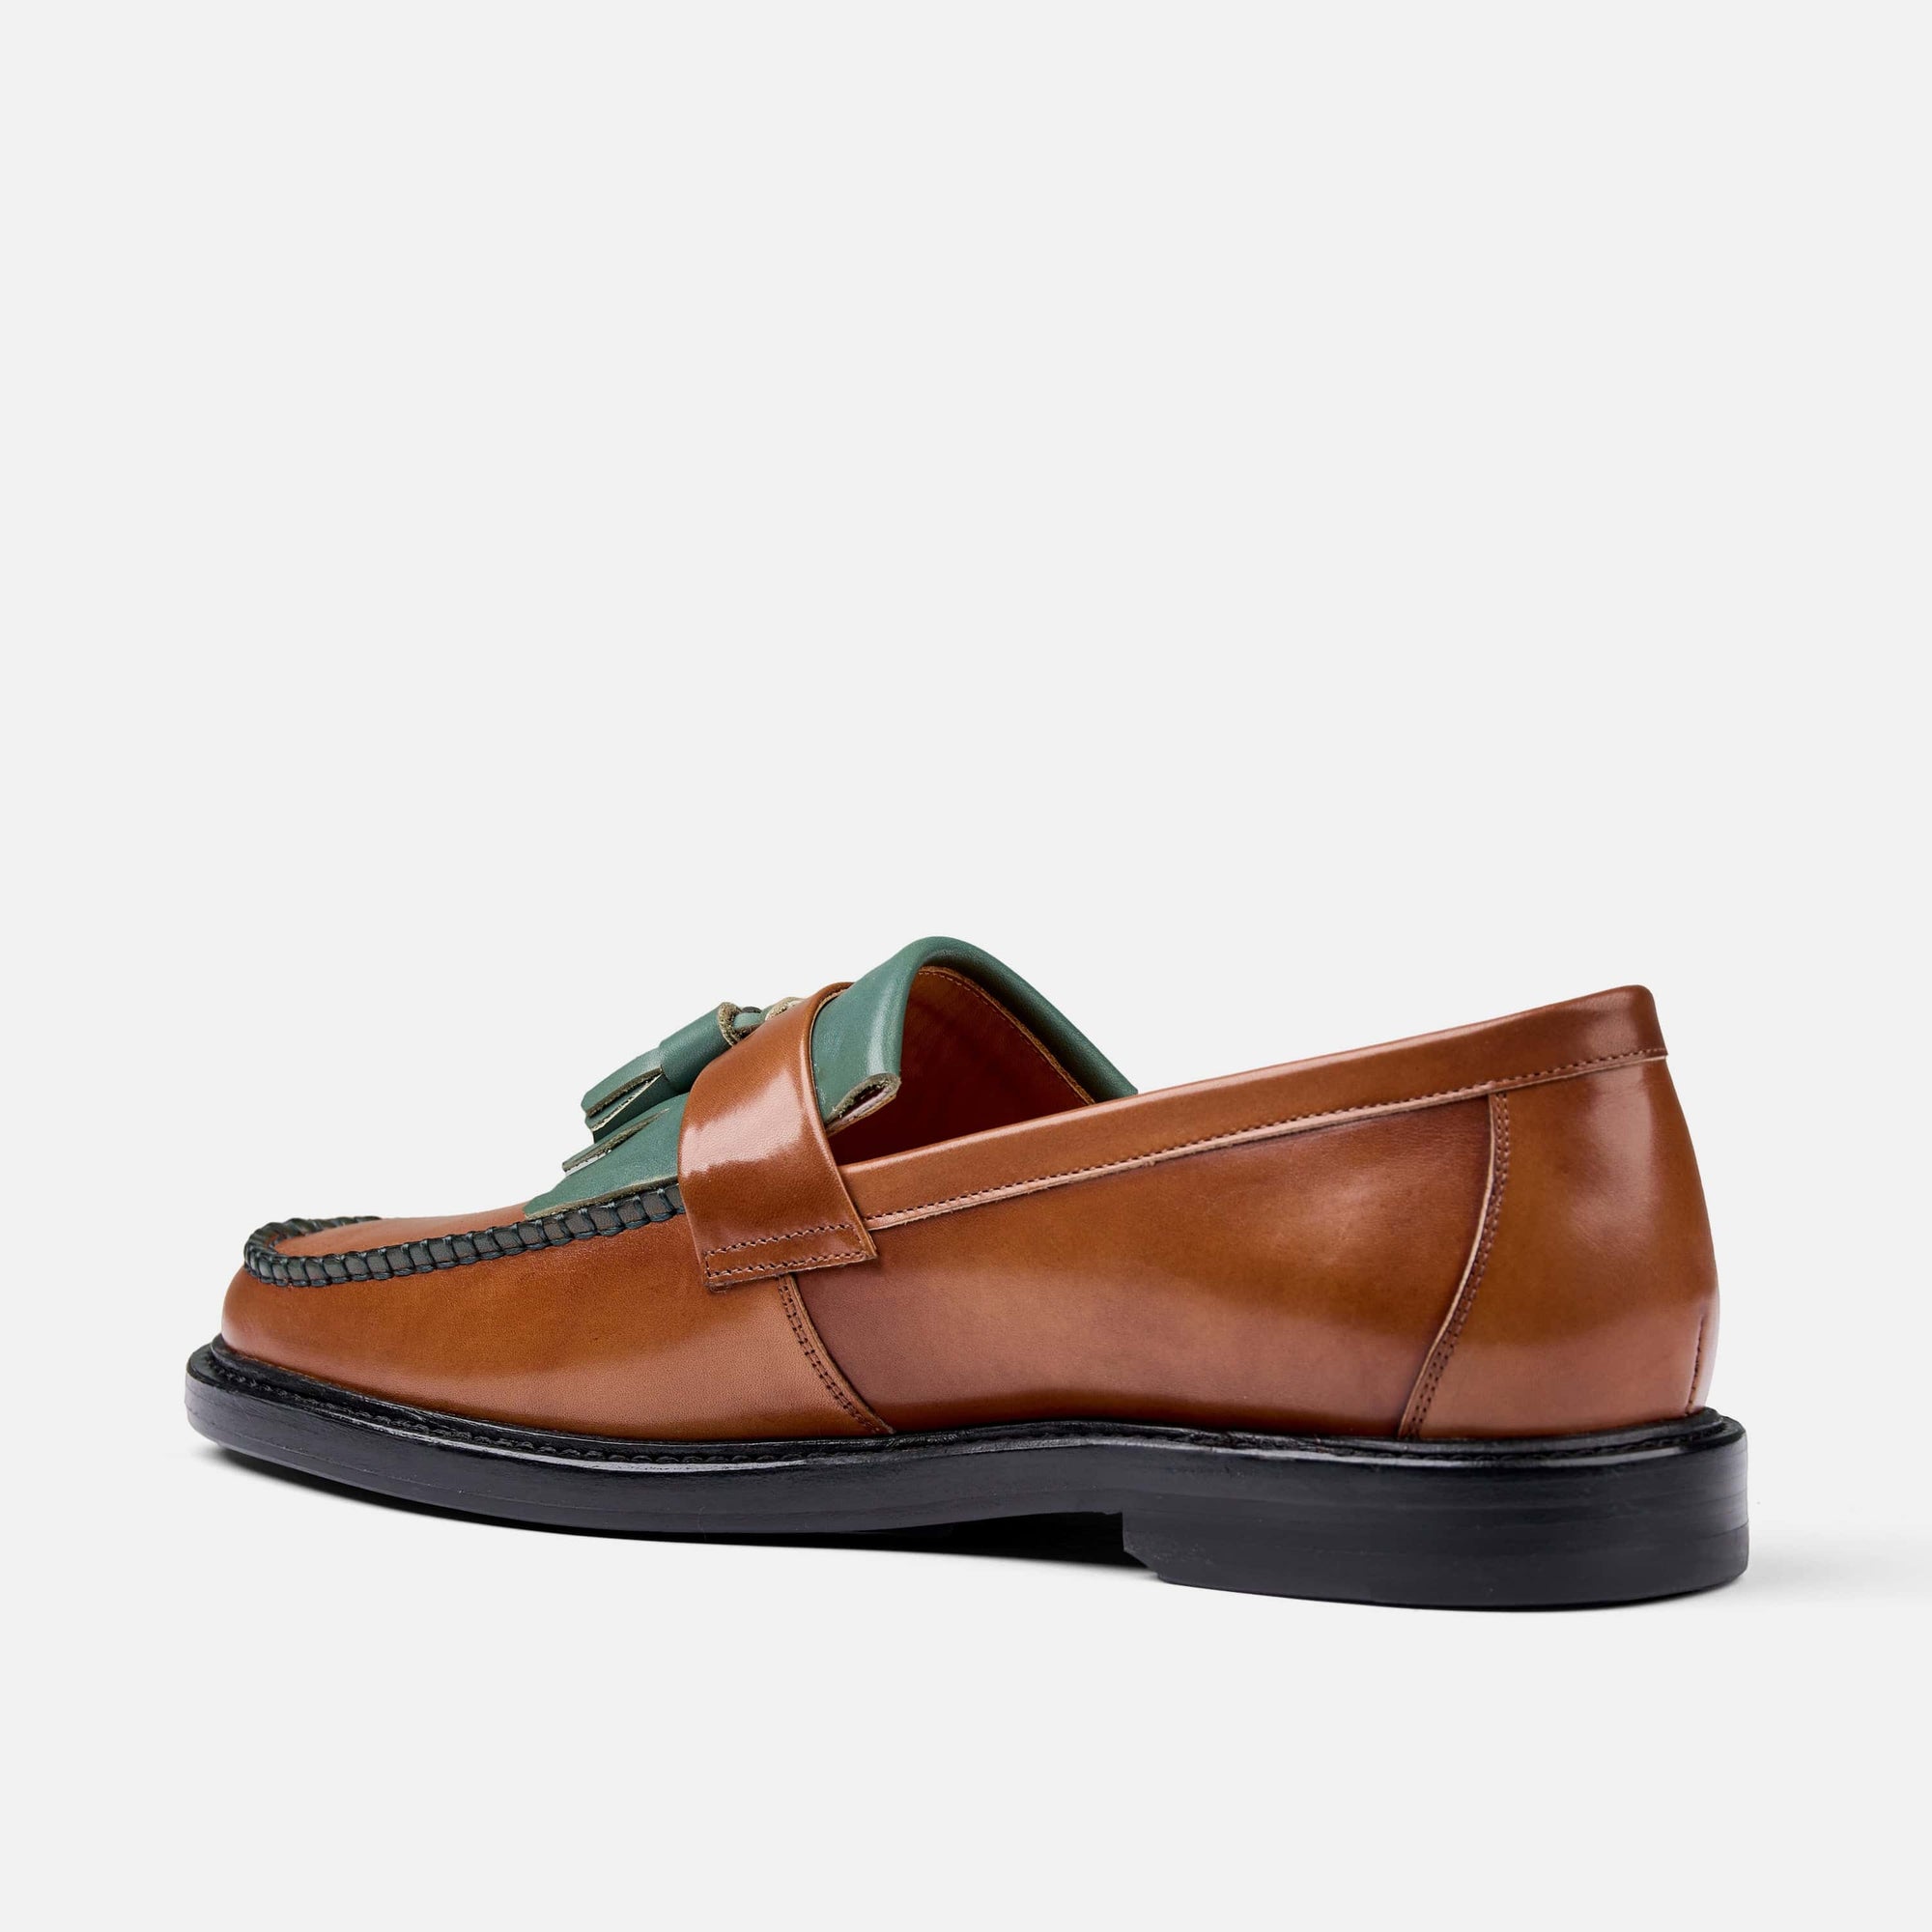 GQ Tassel Kilted Loafer x Eric Knowles